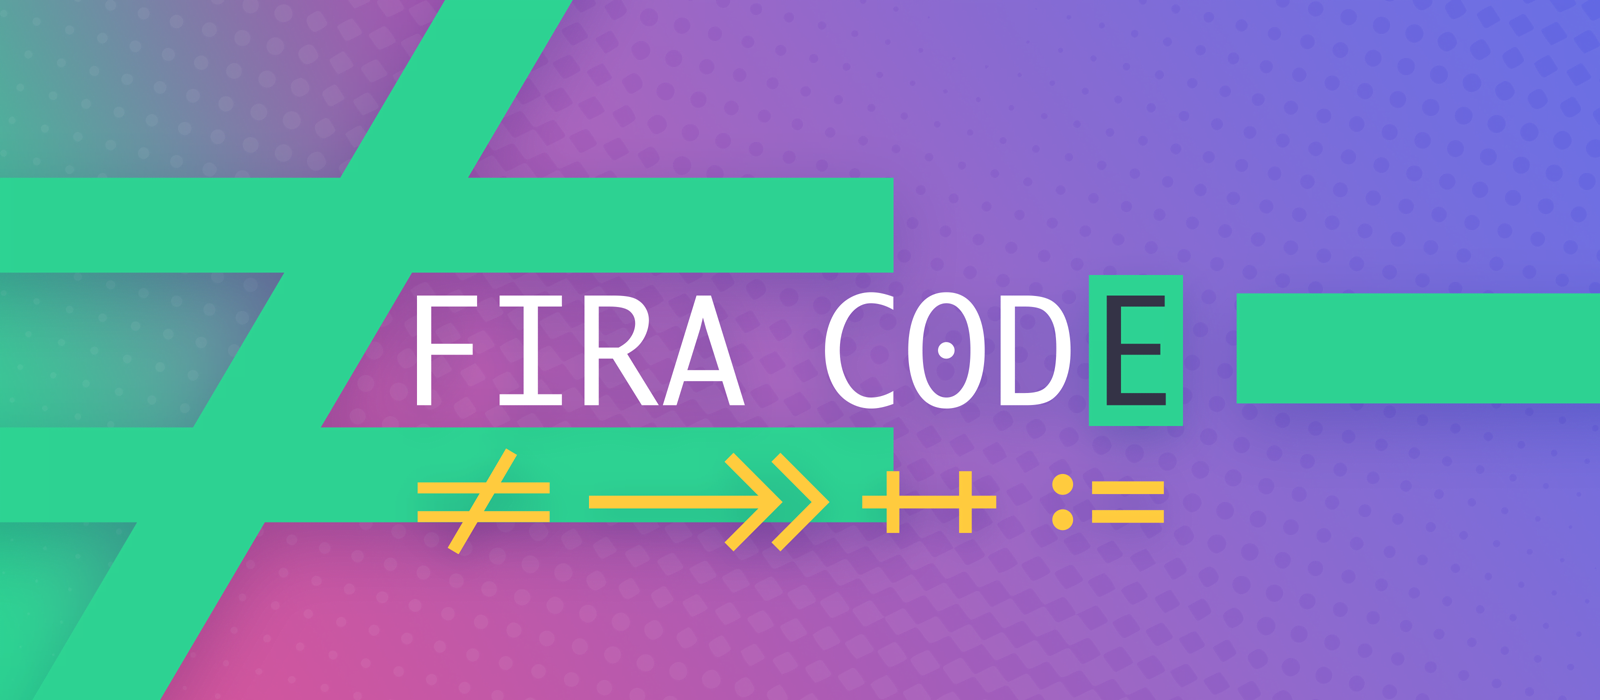 Fira Code – Font with Programming Ligatures